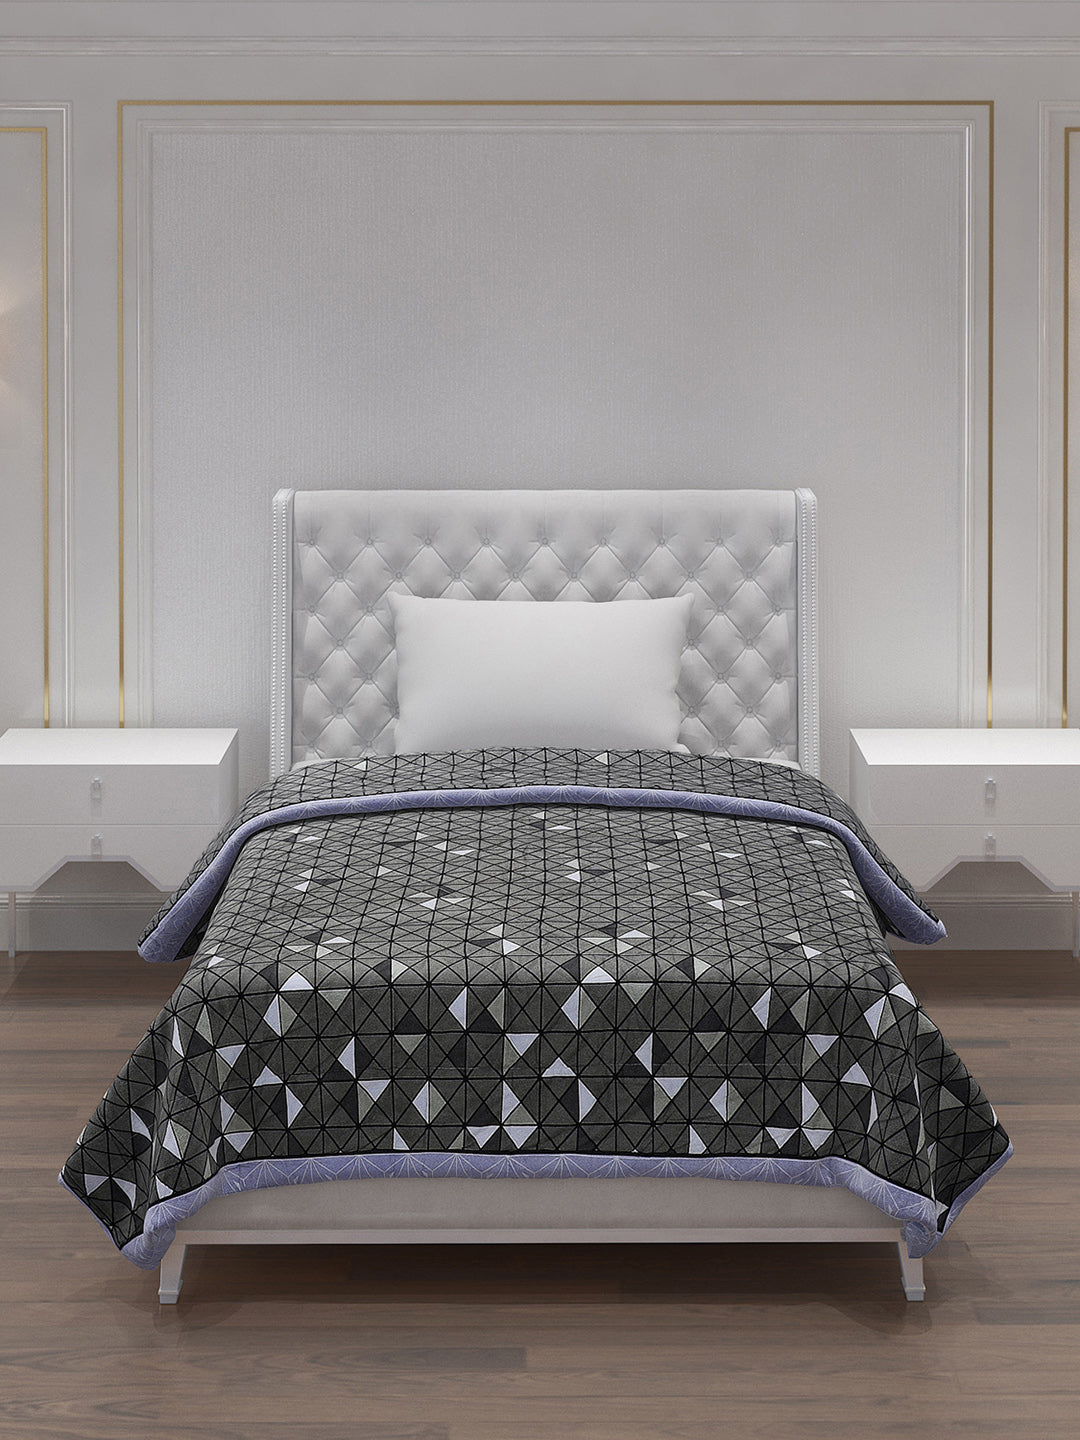 Printed 100% Polyster Single Bed Comforter for AC Room